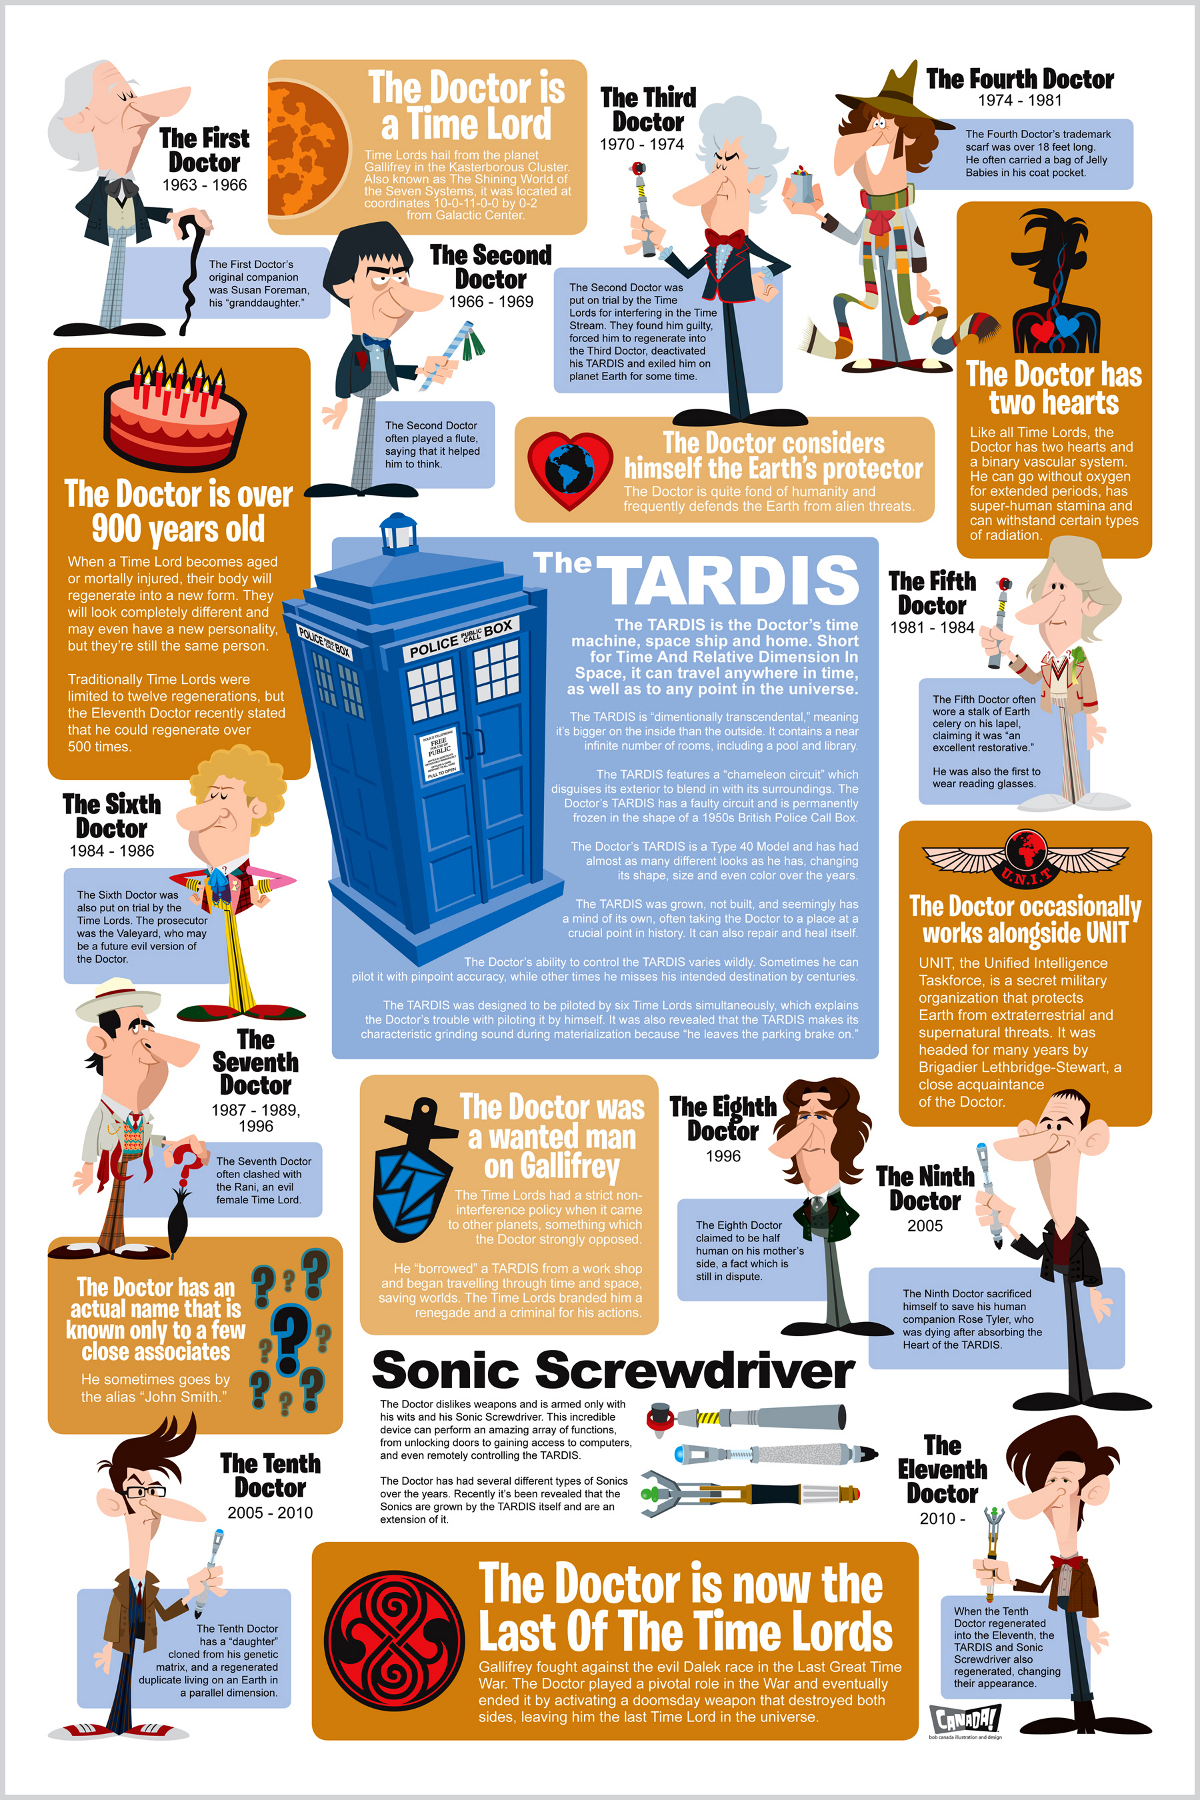 Entertainment Infographic - Doctor Who and the TARDIS